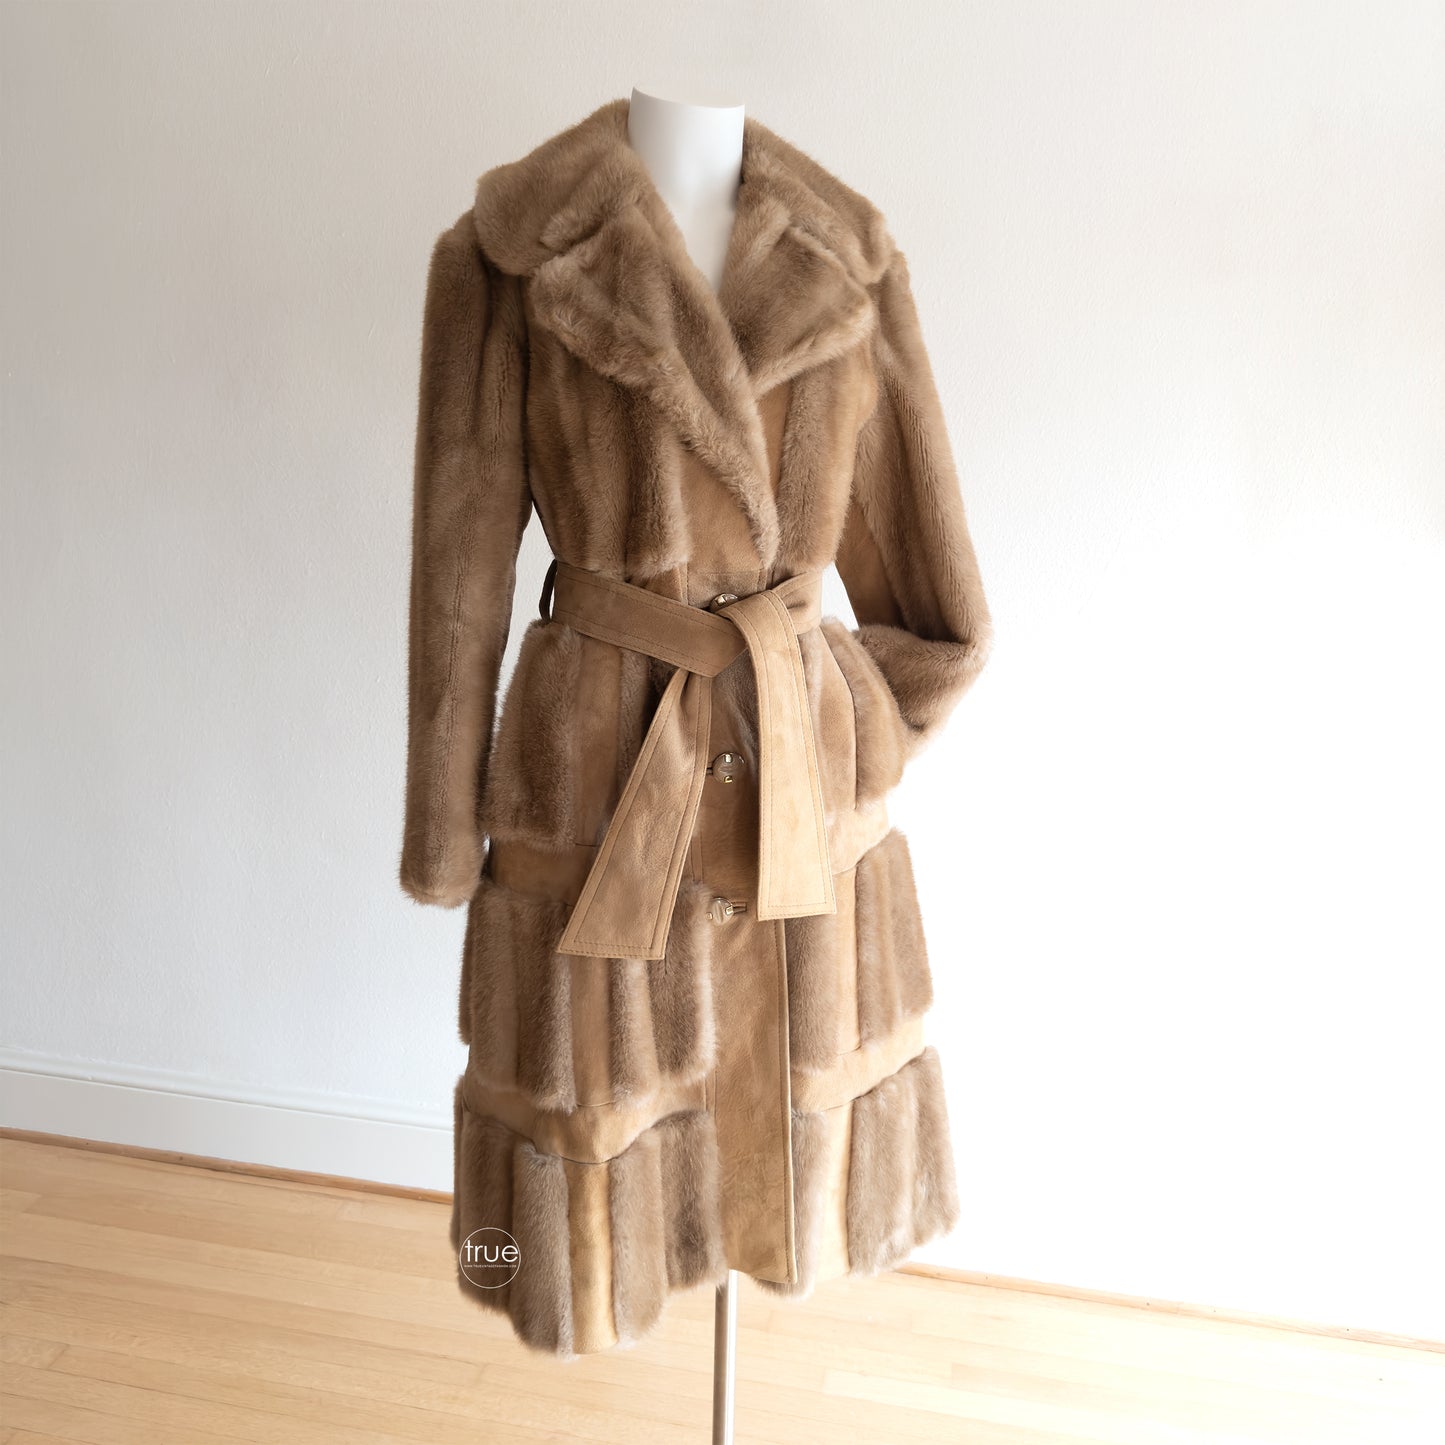 vintage 1960's coat ...superfly TOCCI french faux fur & suede windowpane coat